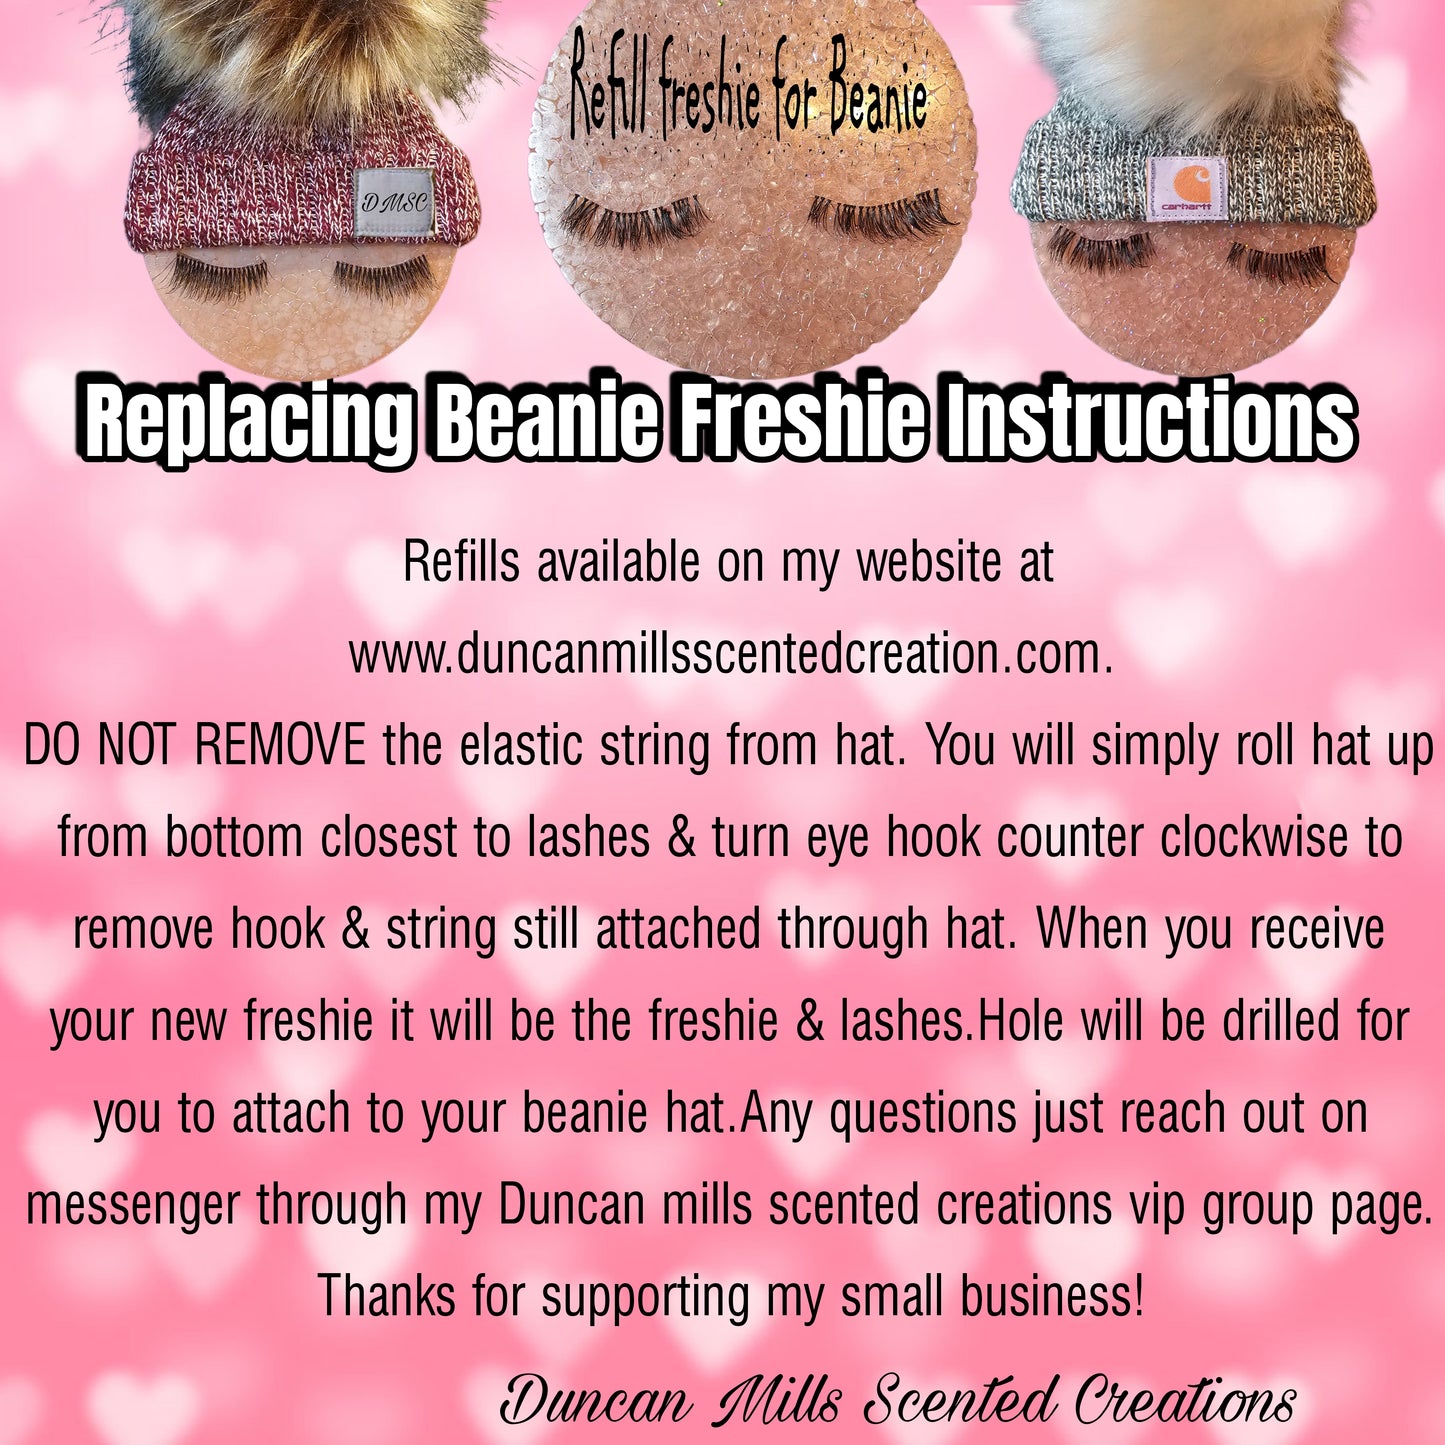 Refill Only for Lashes w/ Beanie Freshie